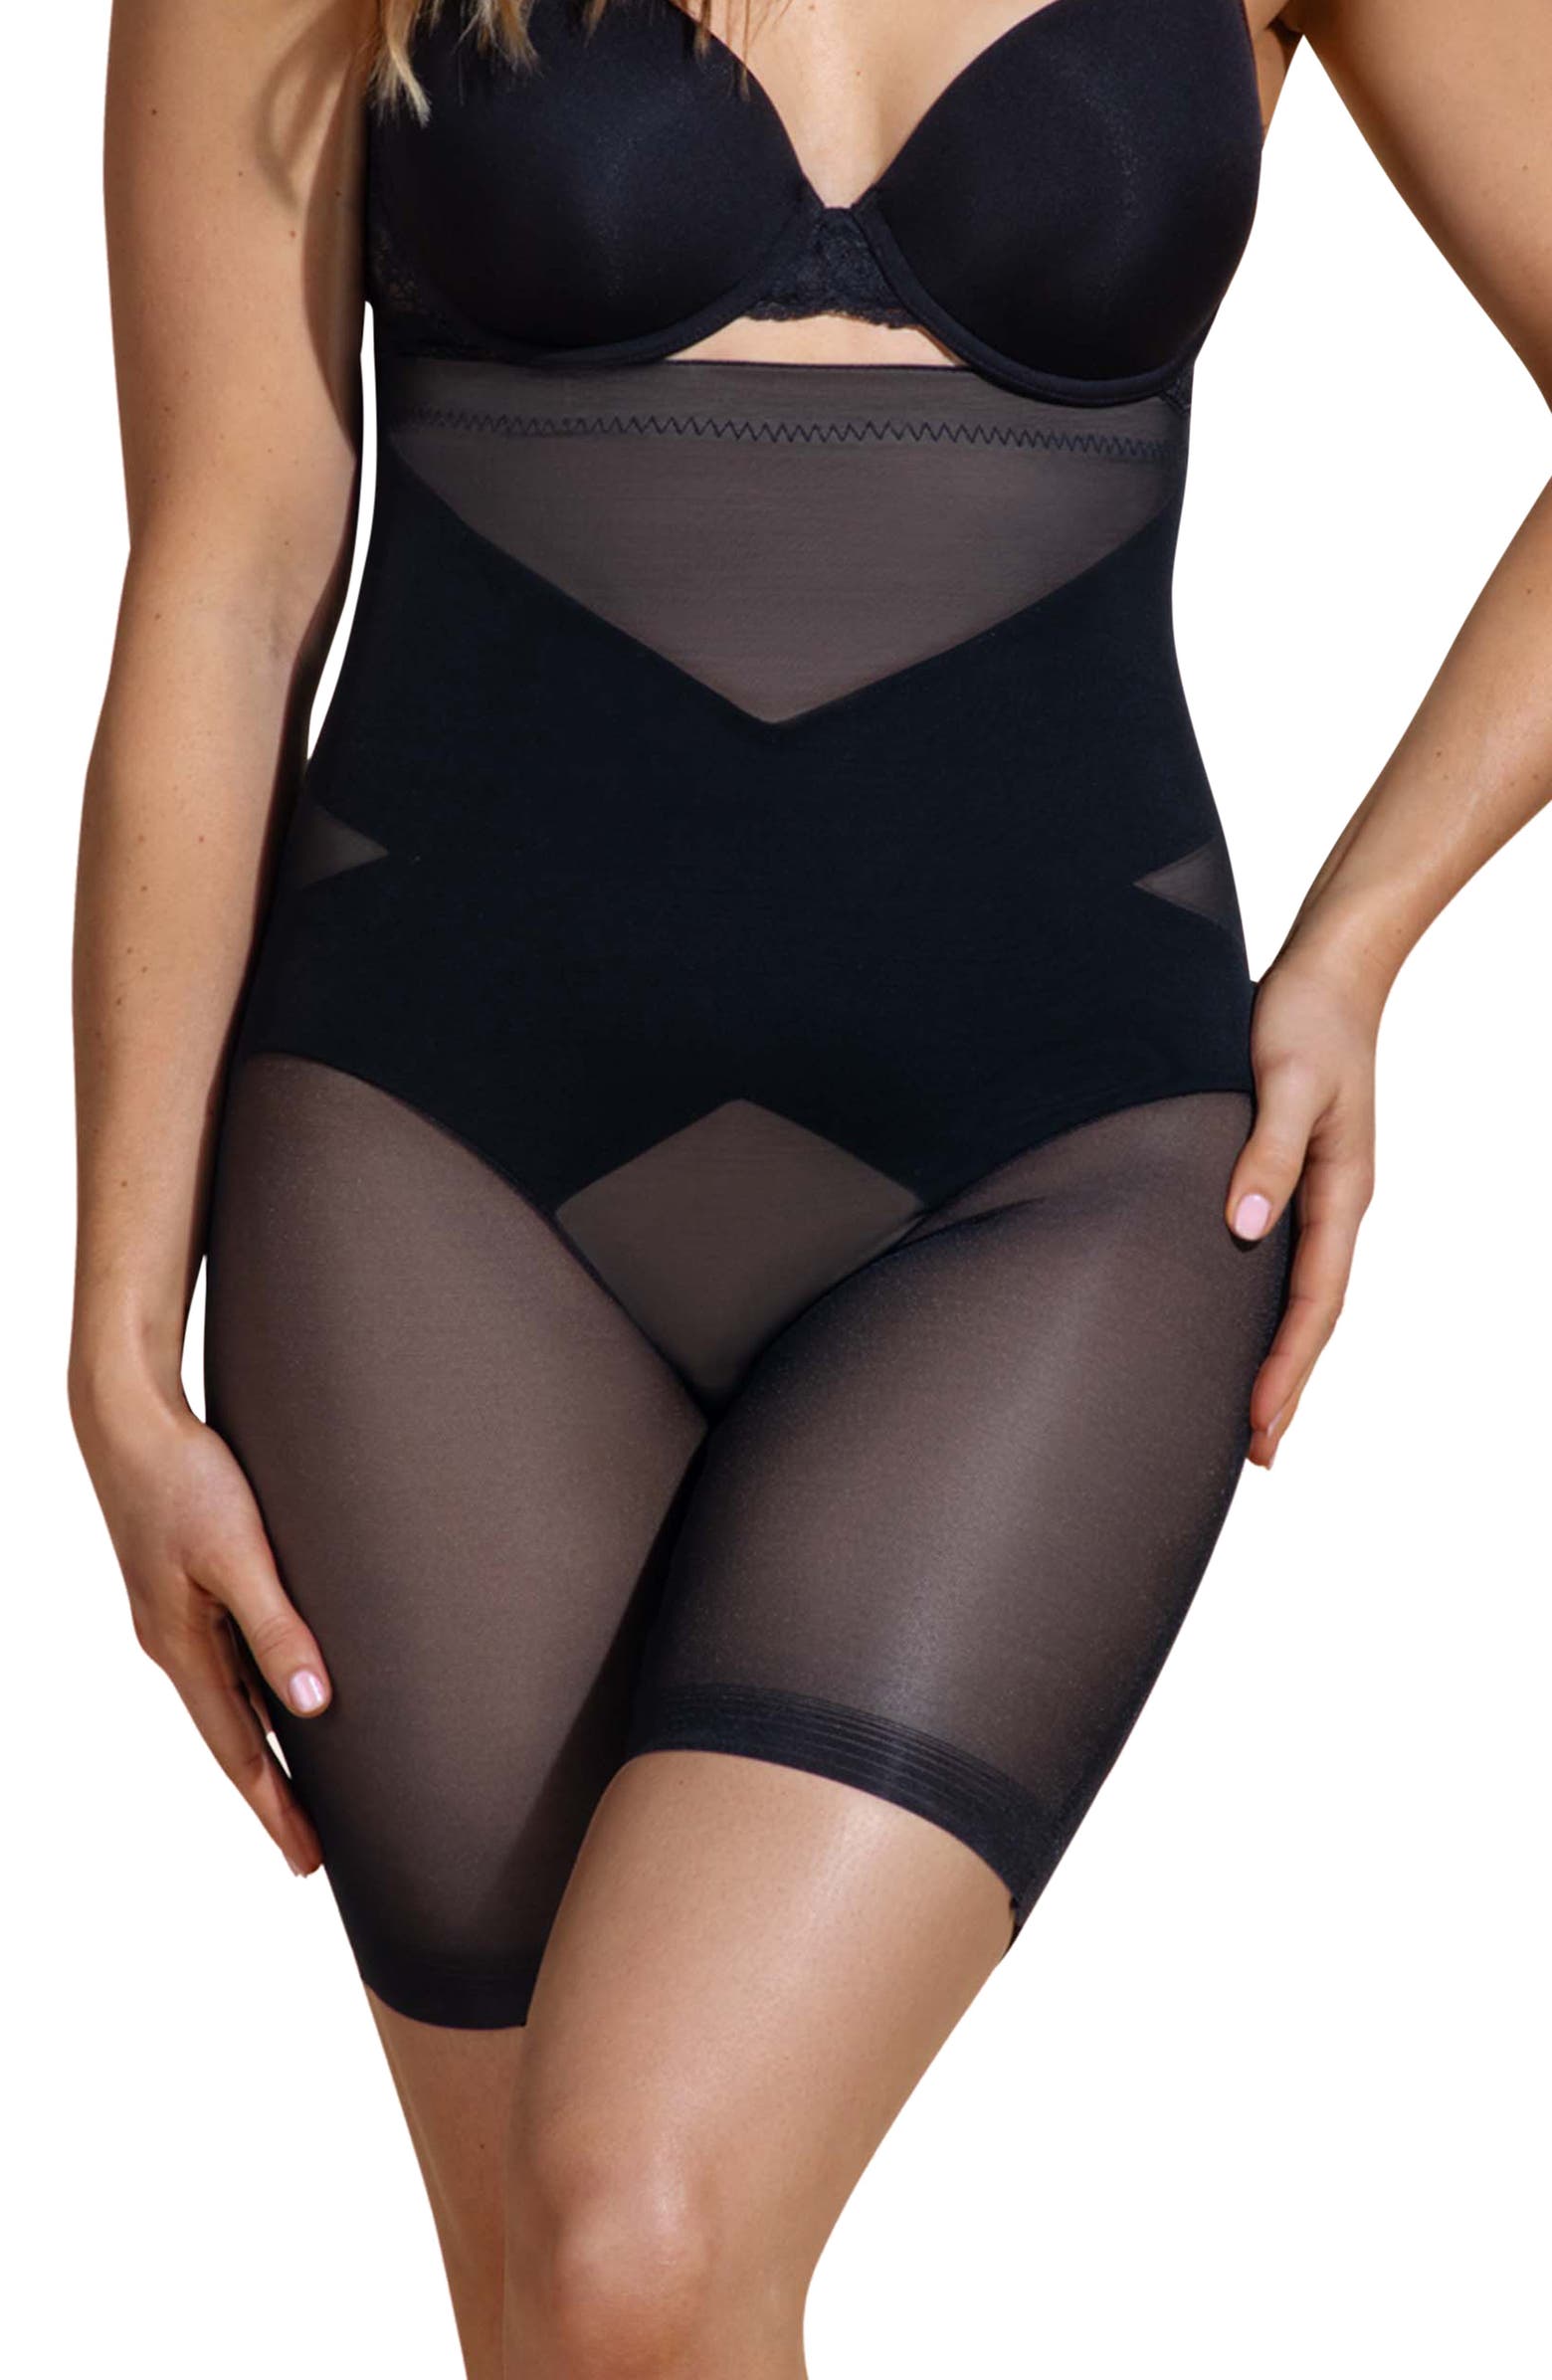 Kimmay* on X: Curious about shapewear but not 100% sure about it